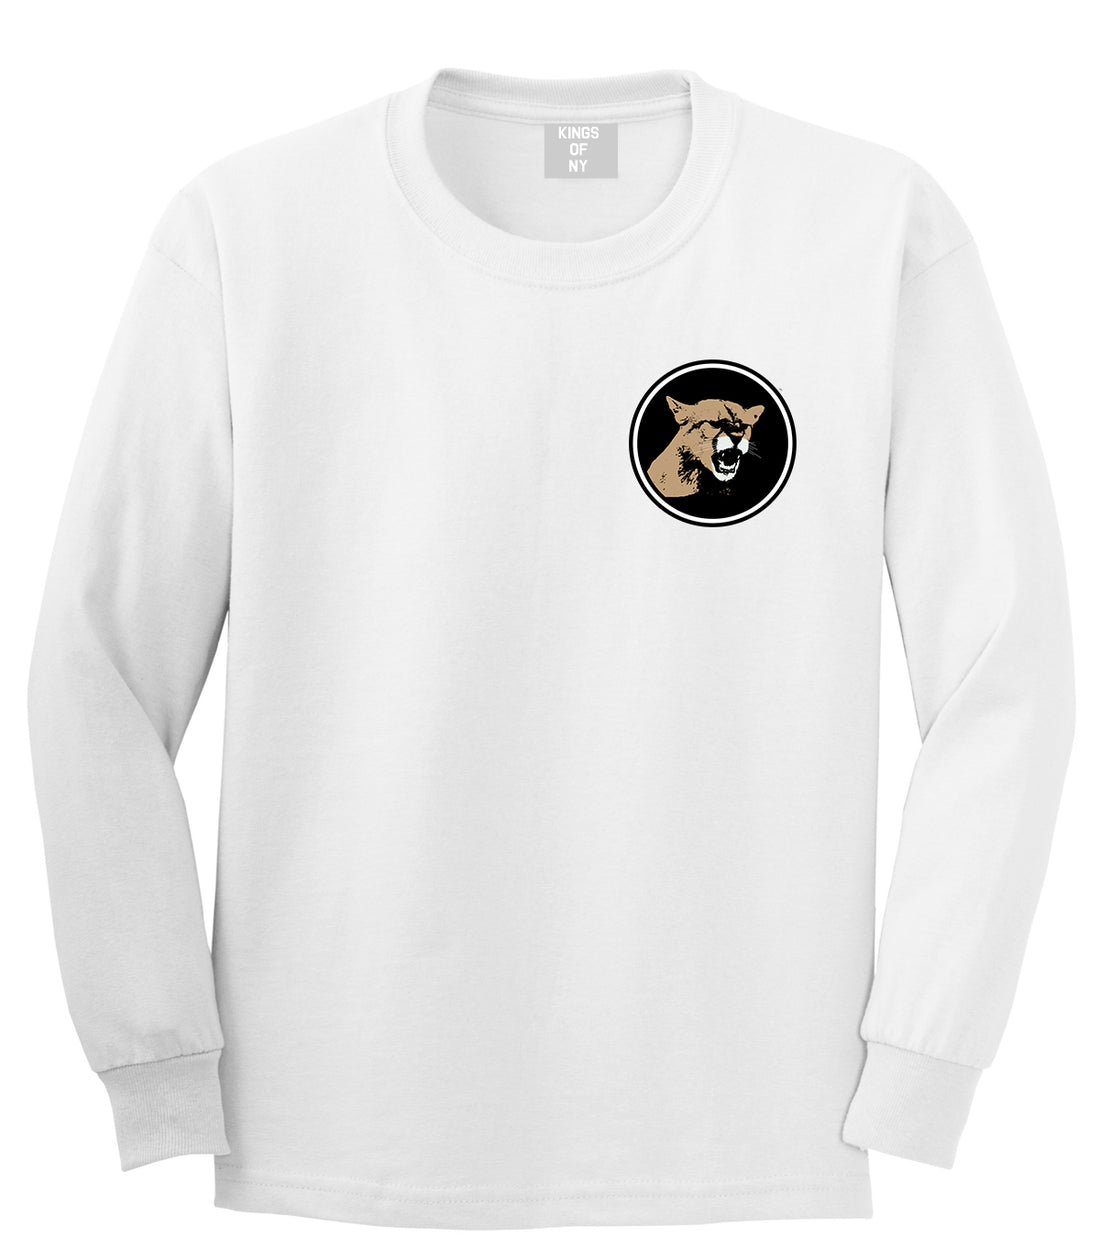 Angry Cougar Chest White Long Sleeve T-Shirt by Kings Of NY